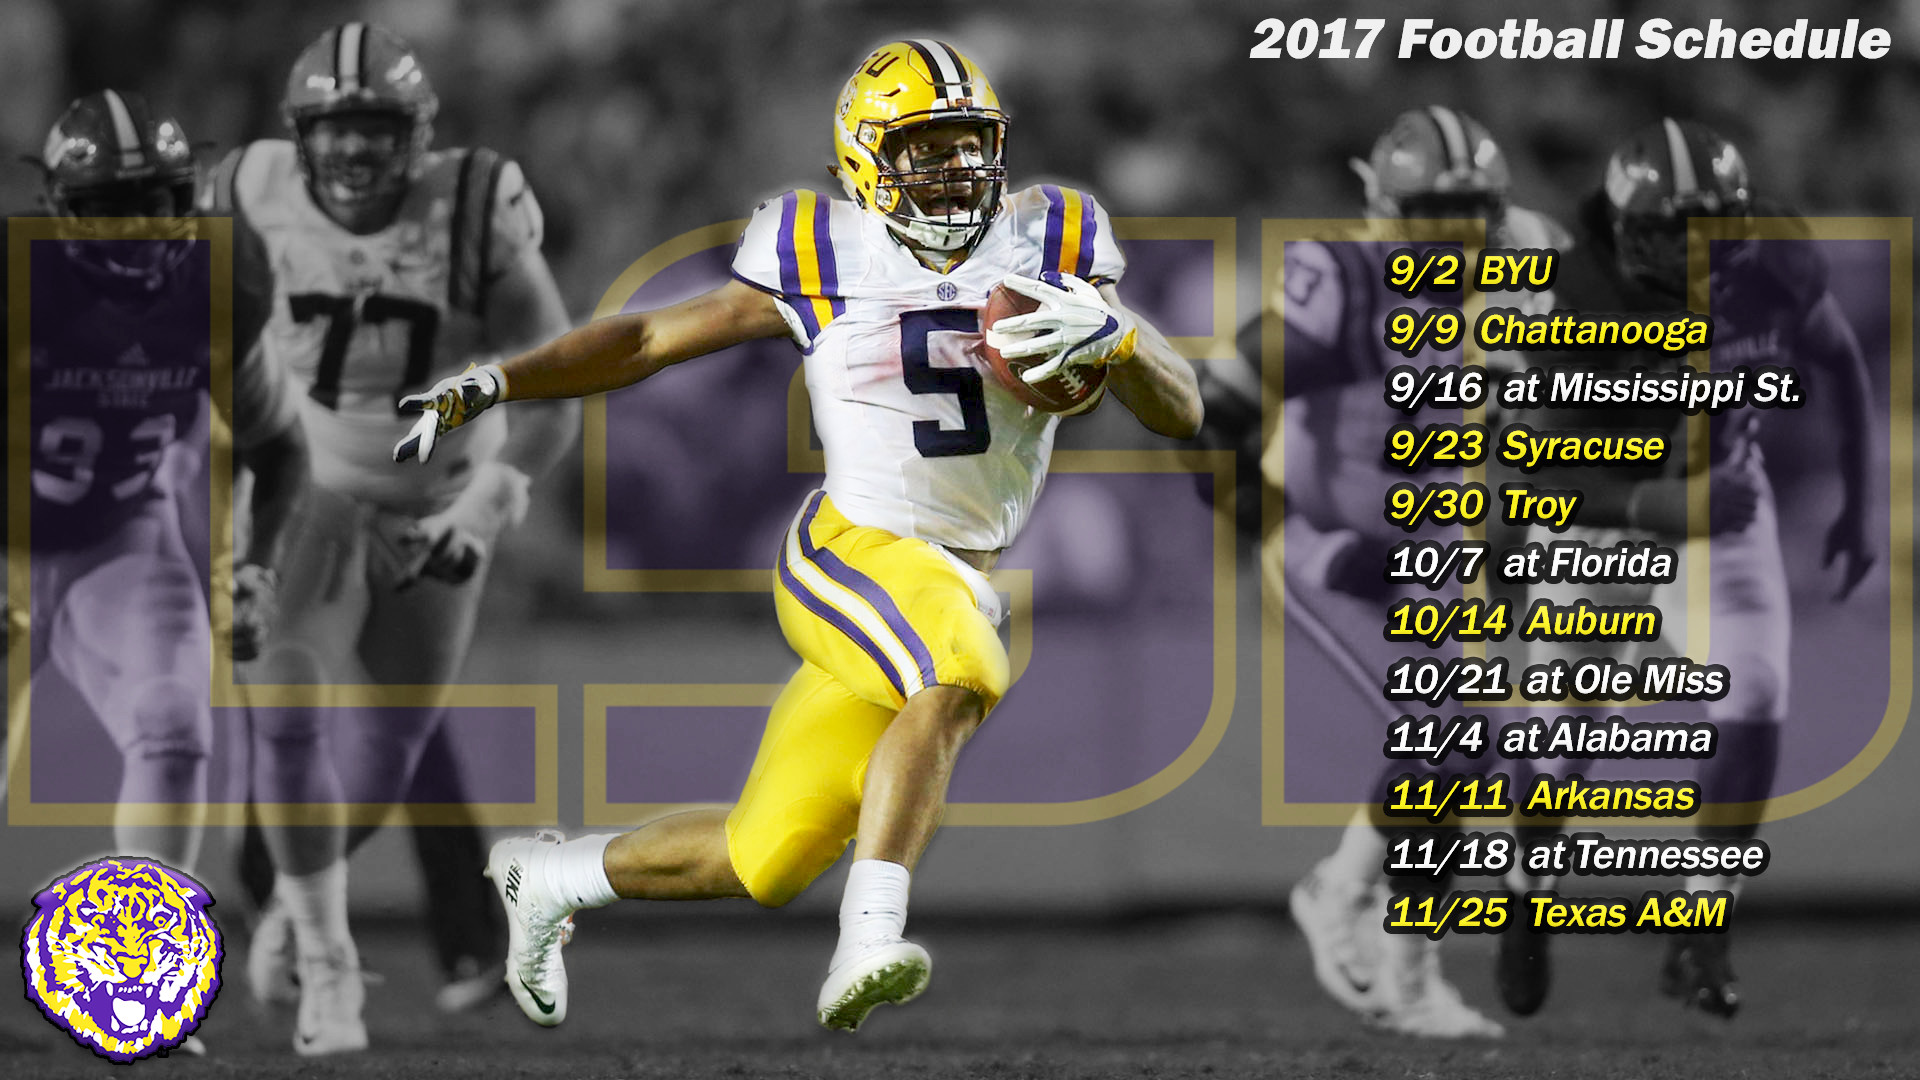 1920x1080 Figured I'd share with the GOAT LSU site, plan on making more soon. Always  looking for new wallpapers too, so share them here if you guys have any.